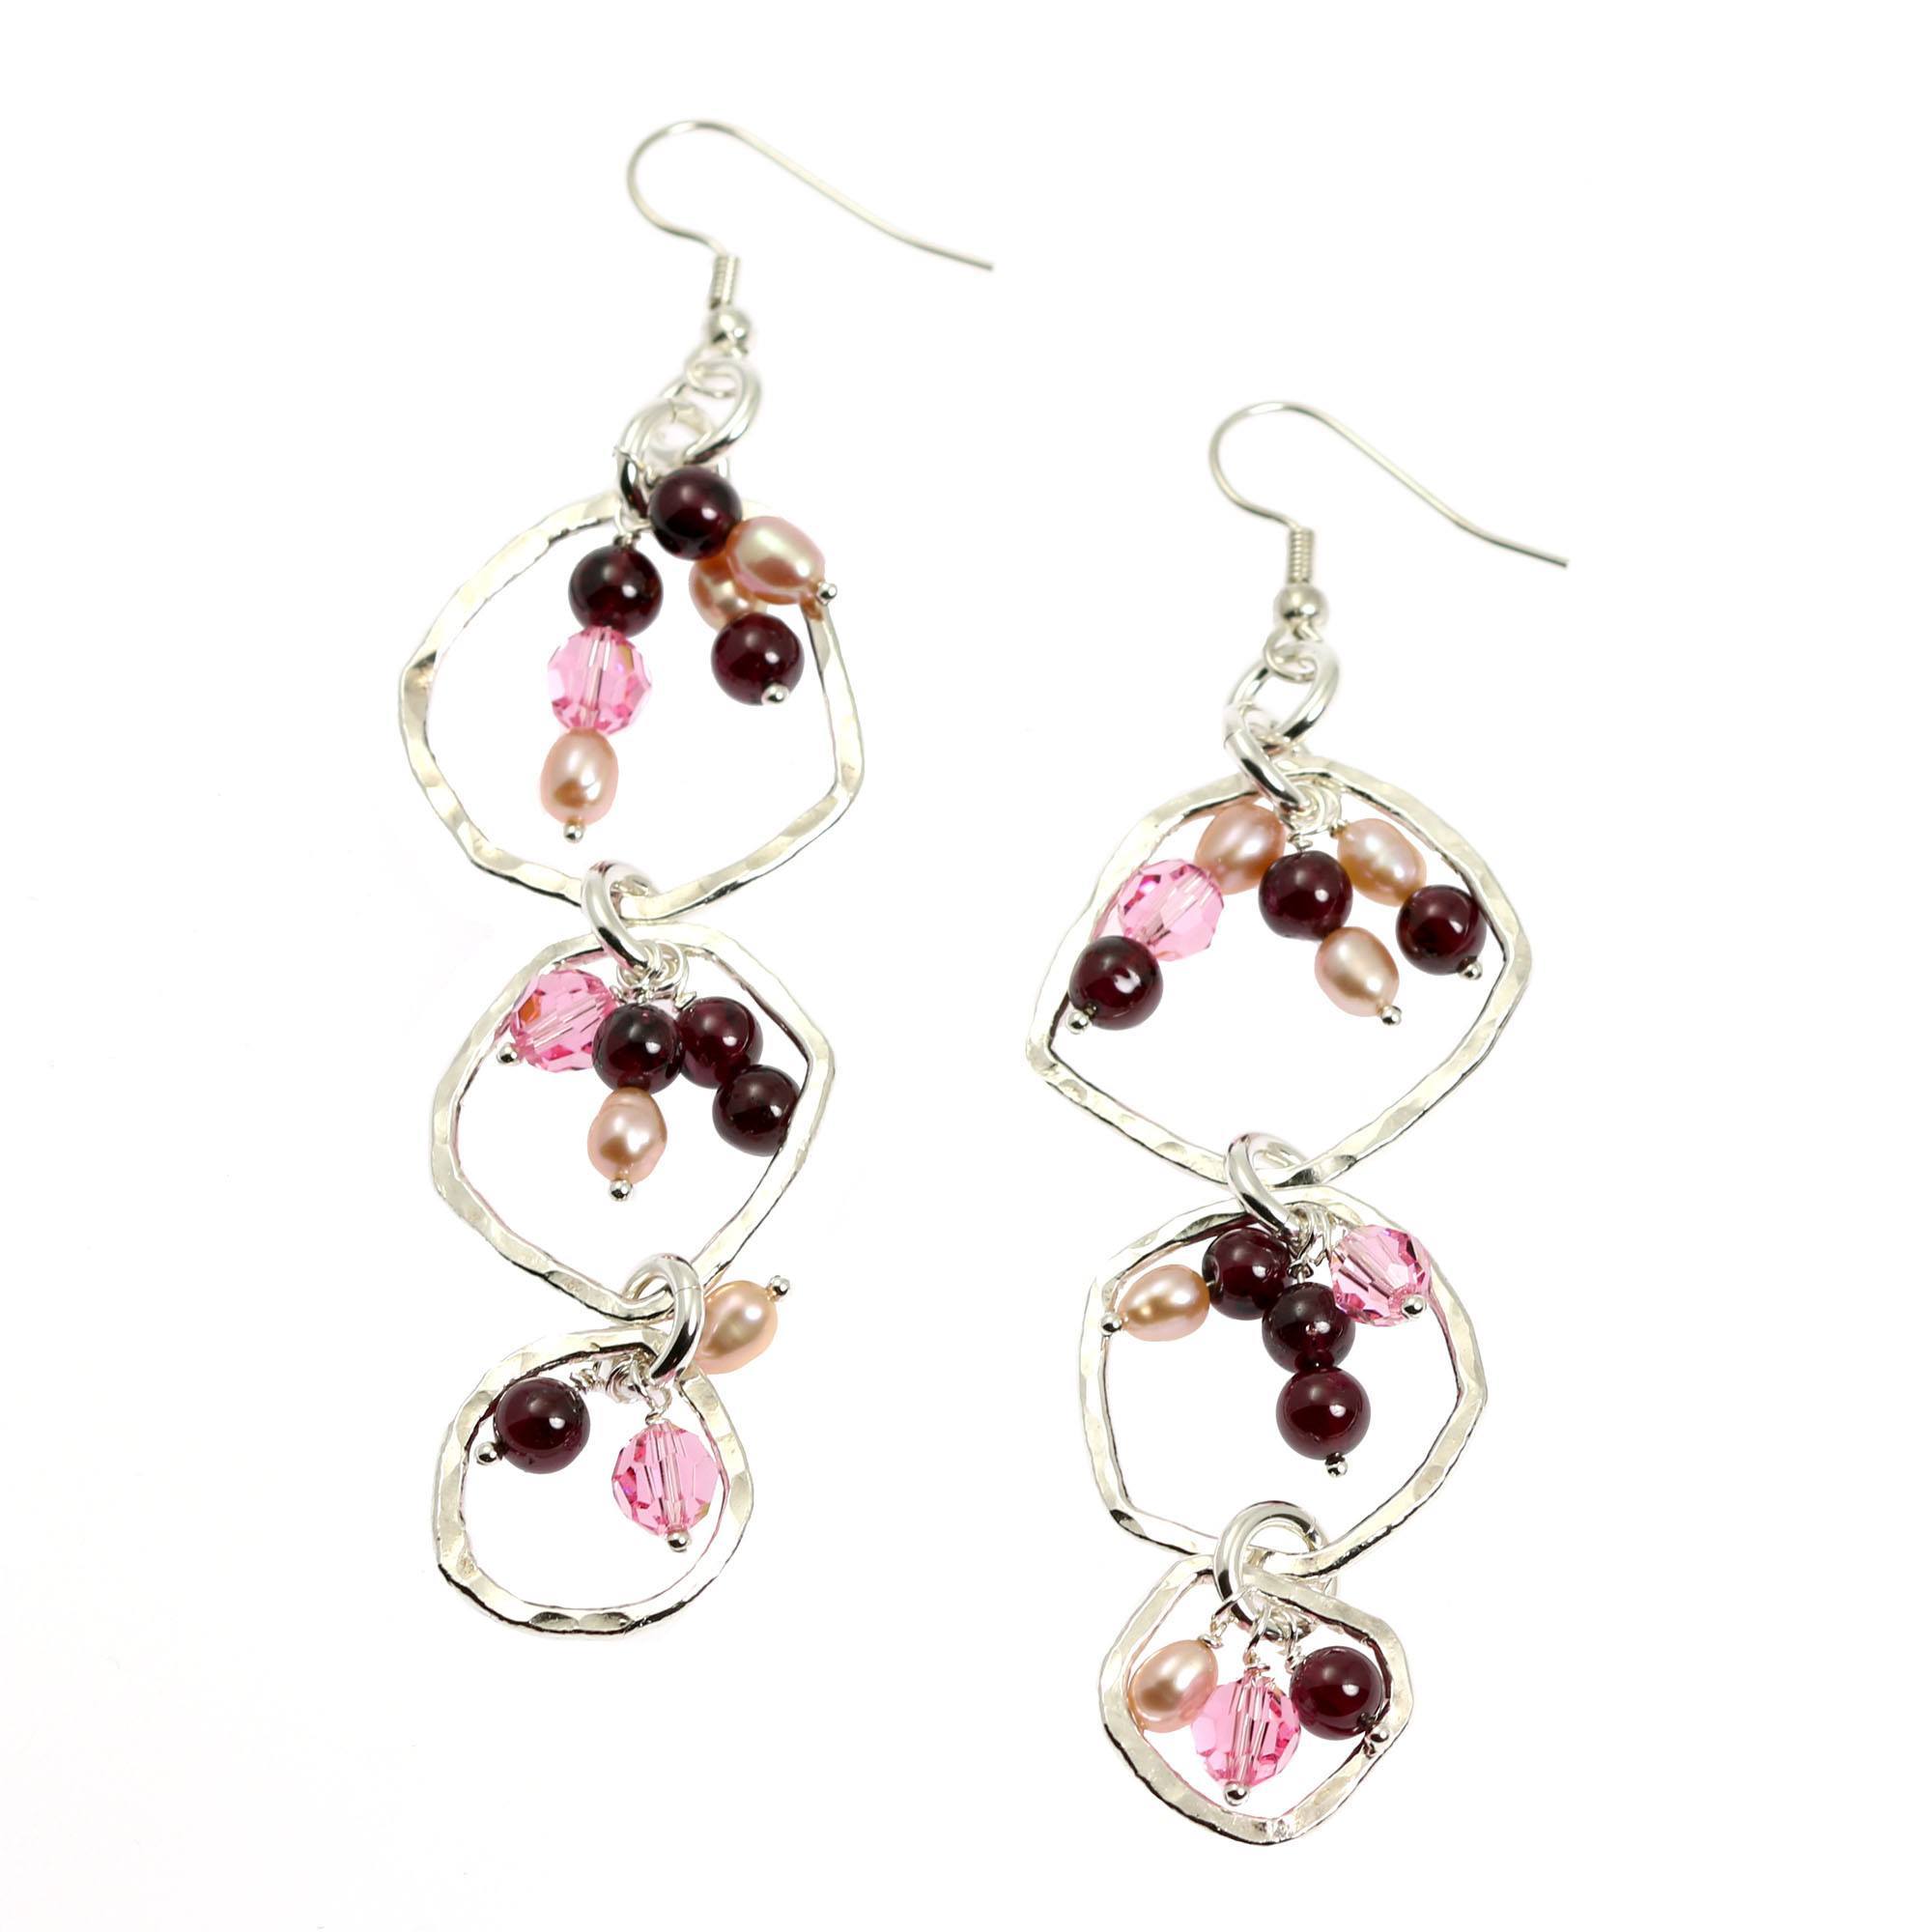 Detail View of Hammered Fine Silver Earrings with Garnets